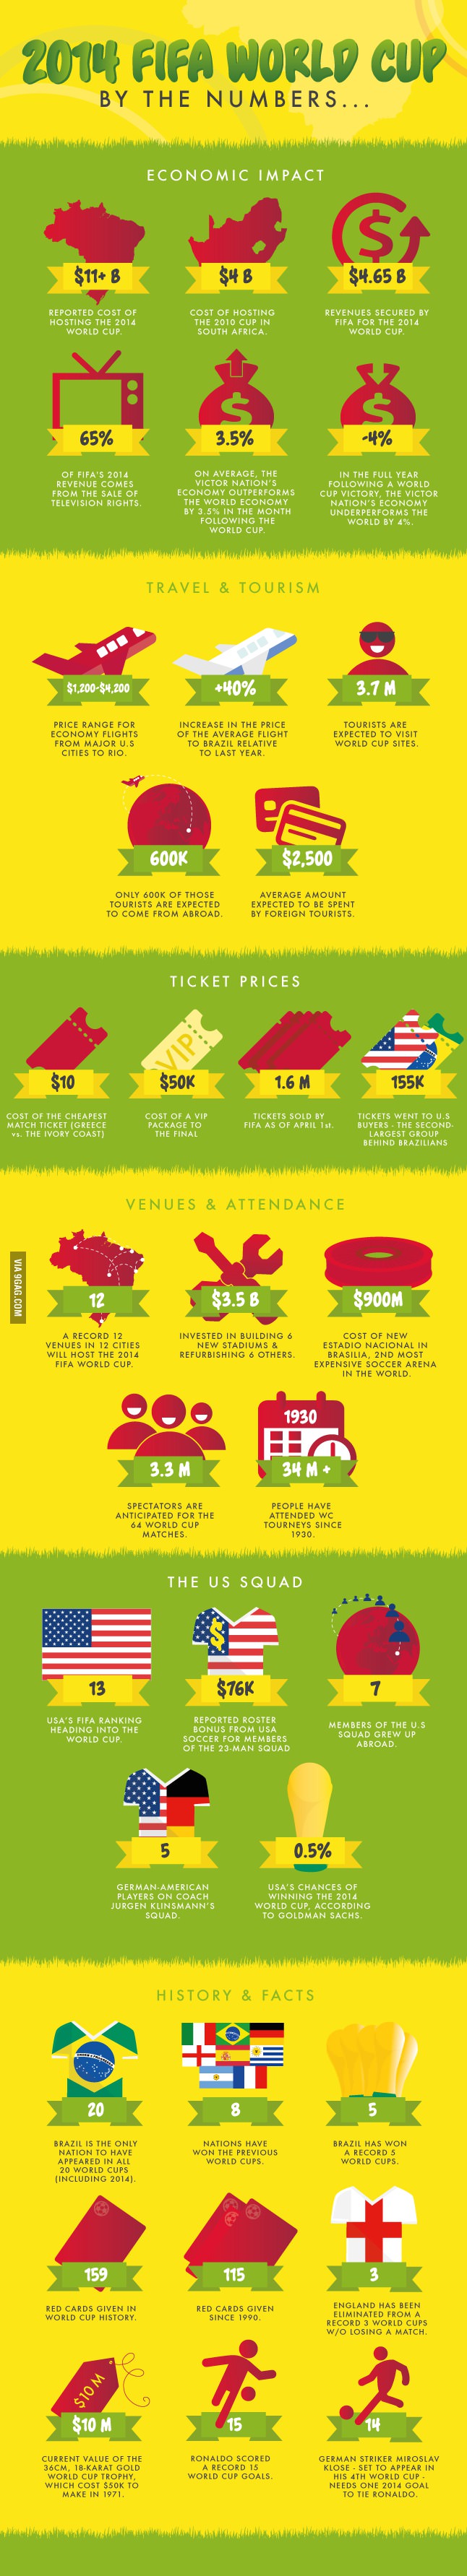 world cup 2014 infographic